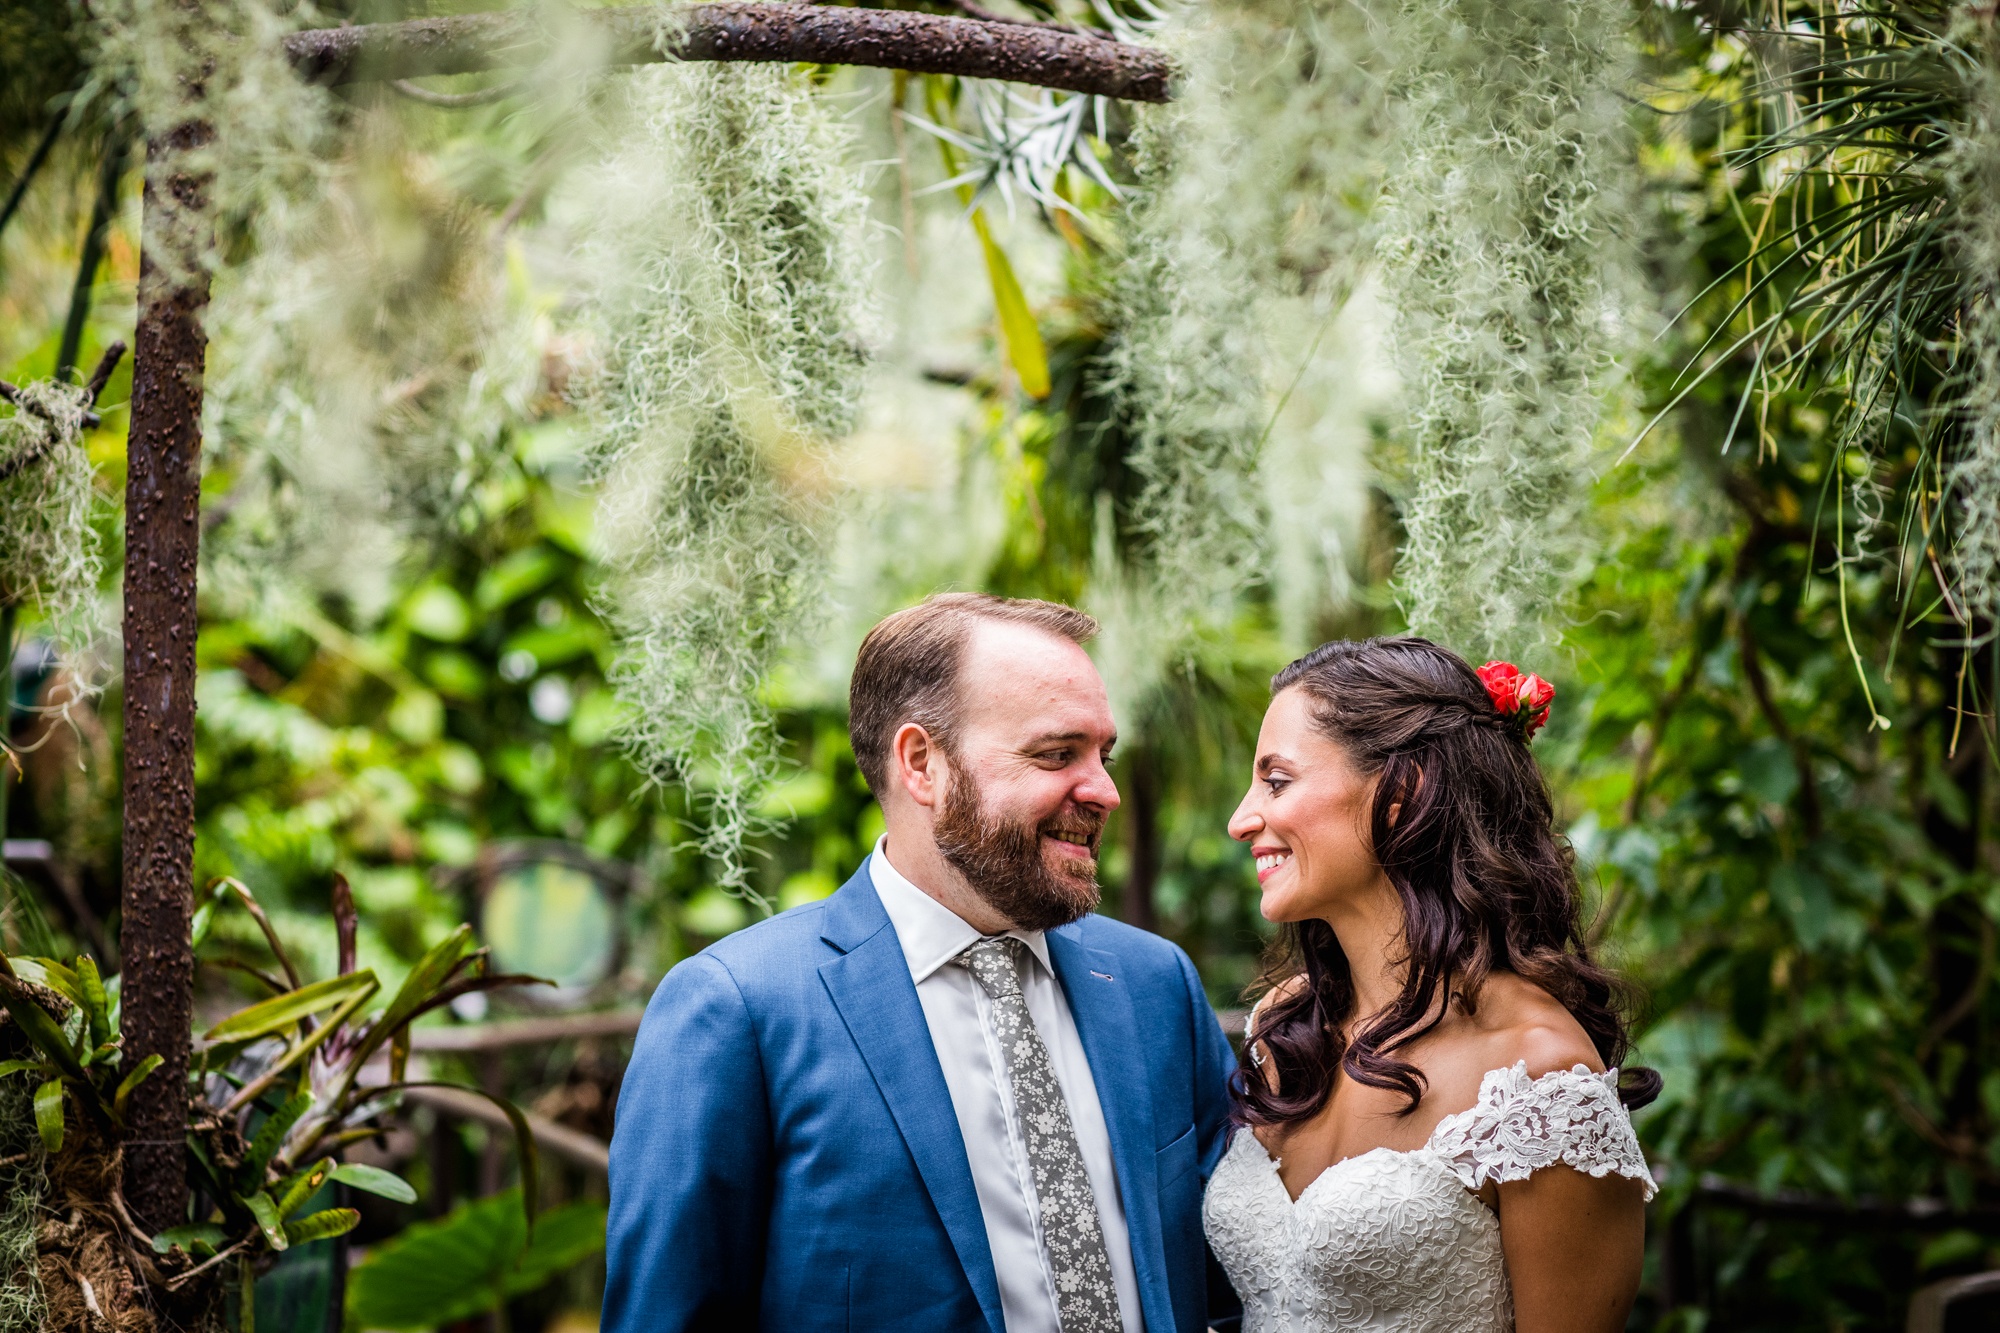 A wedding portrait at the Garfield Park Conservatory